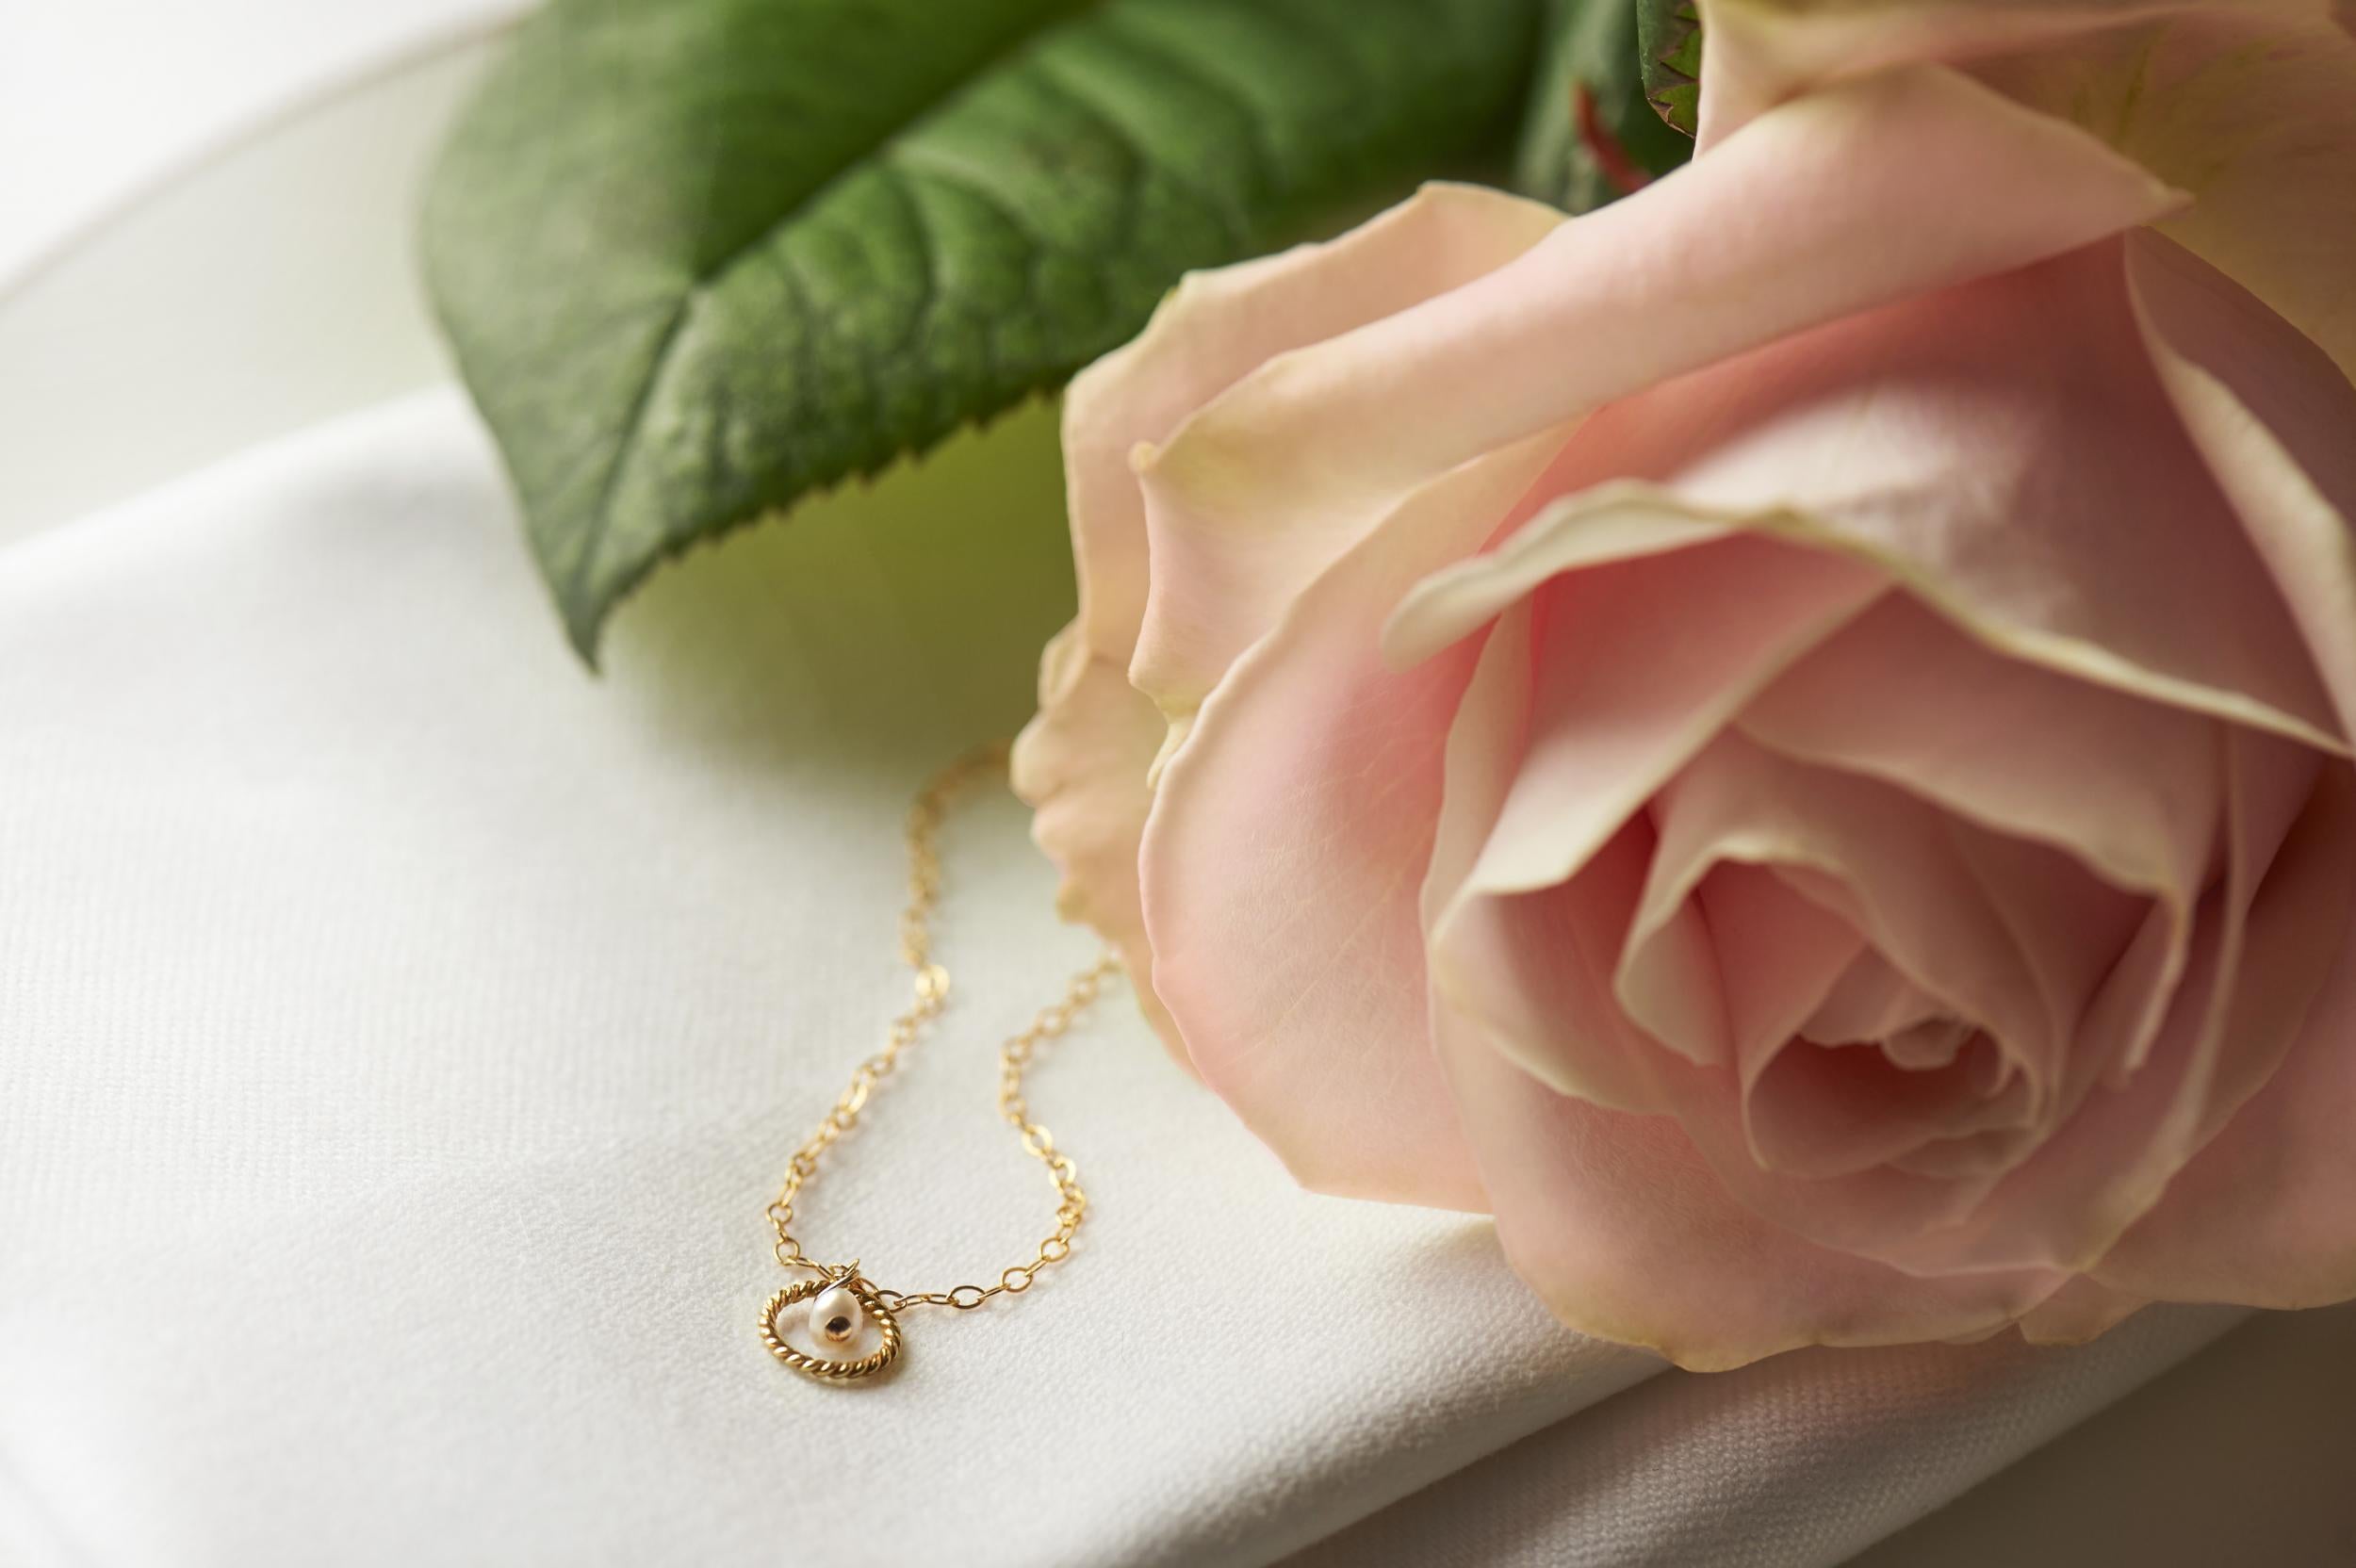 Storey by Storey’s 14k gold filled pendant and chain, also known as Love Knot bracelet